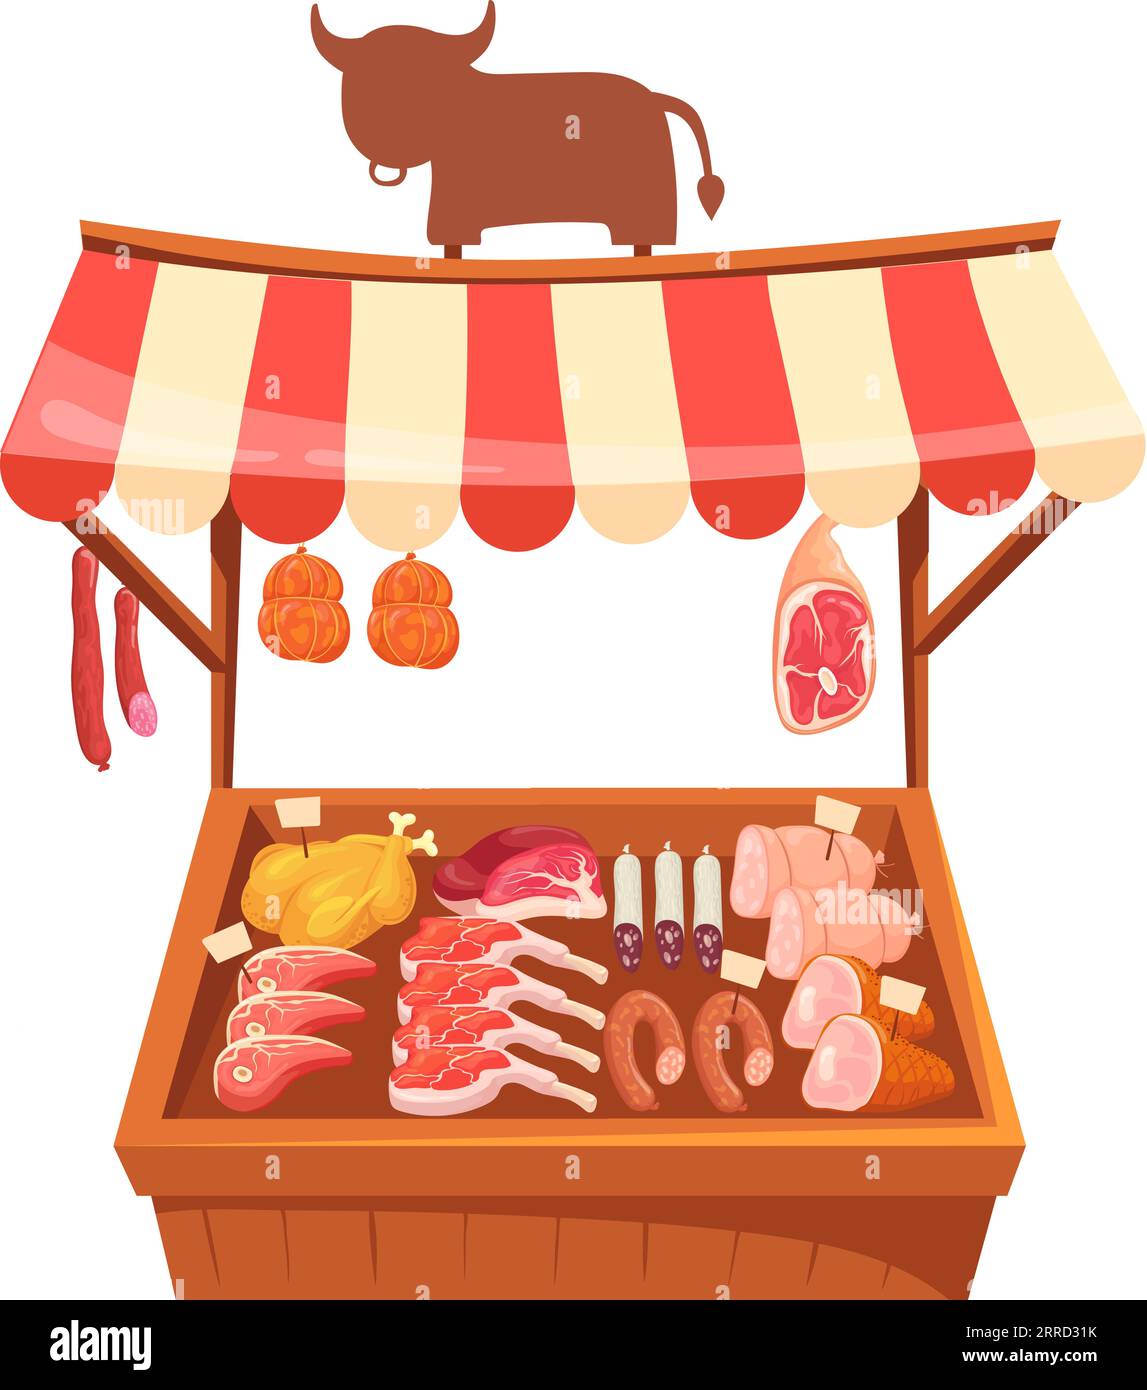 Food market butcher stand. Meat display case isolated on white background Stock Vector